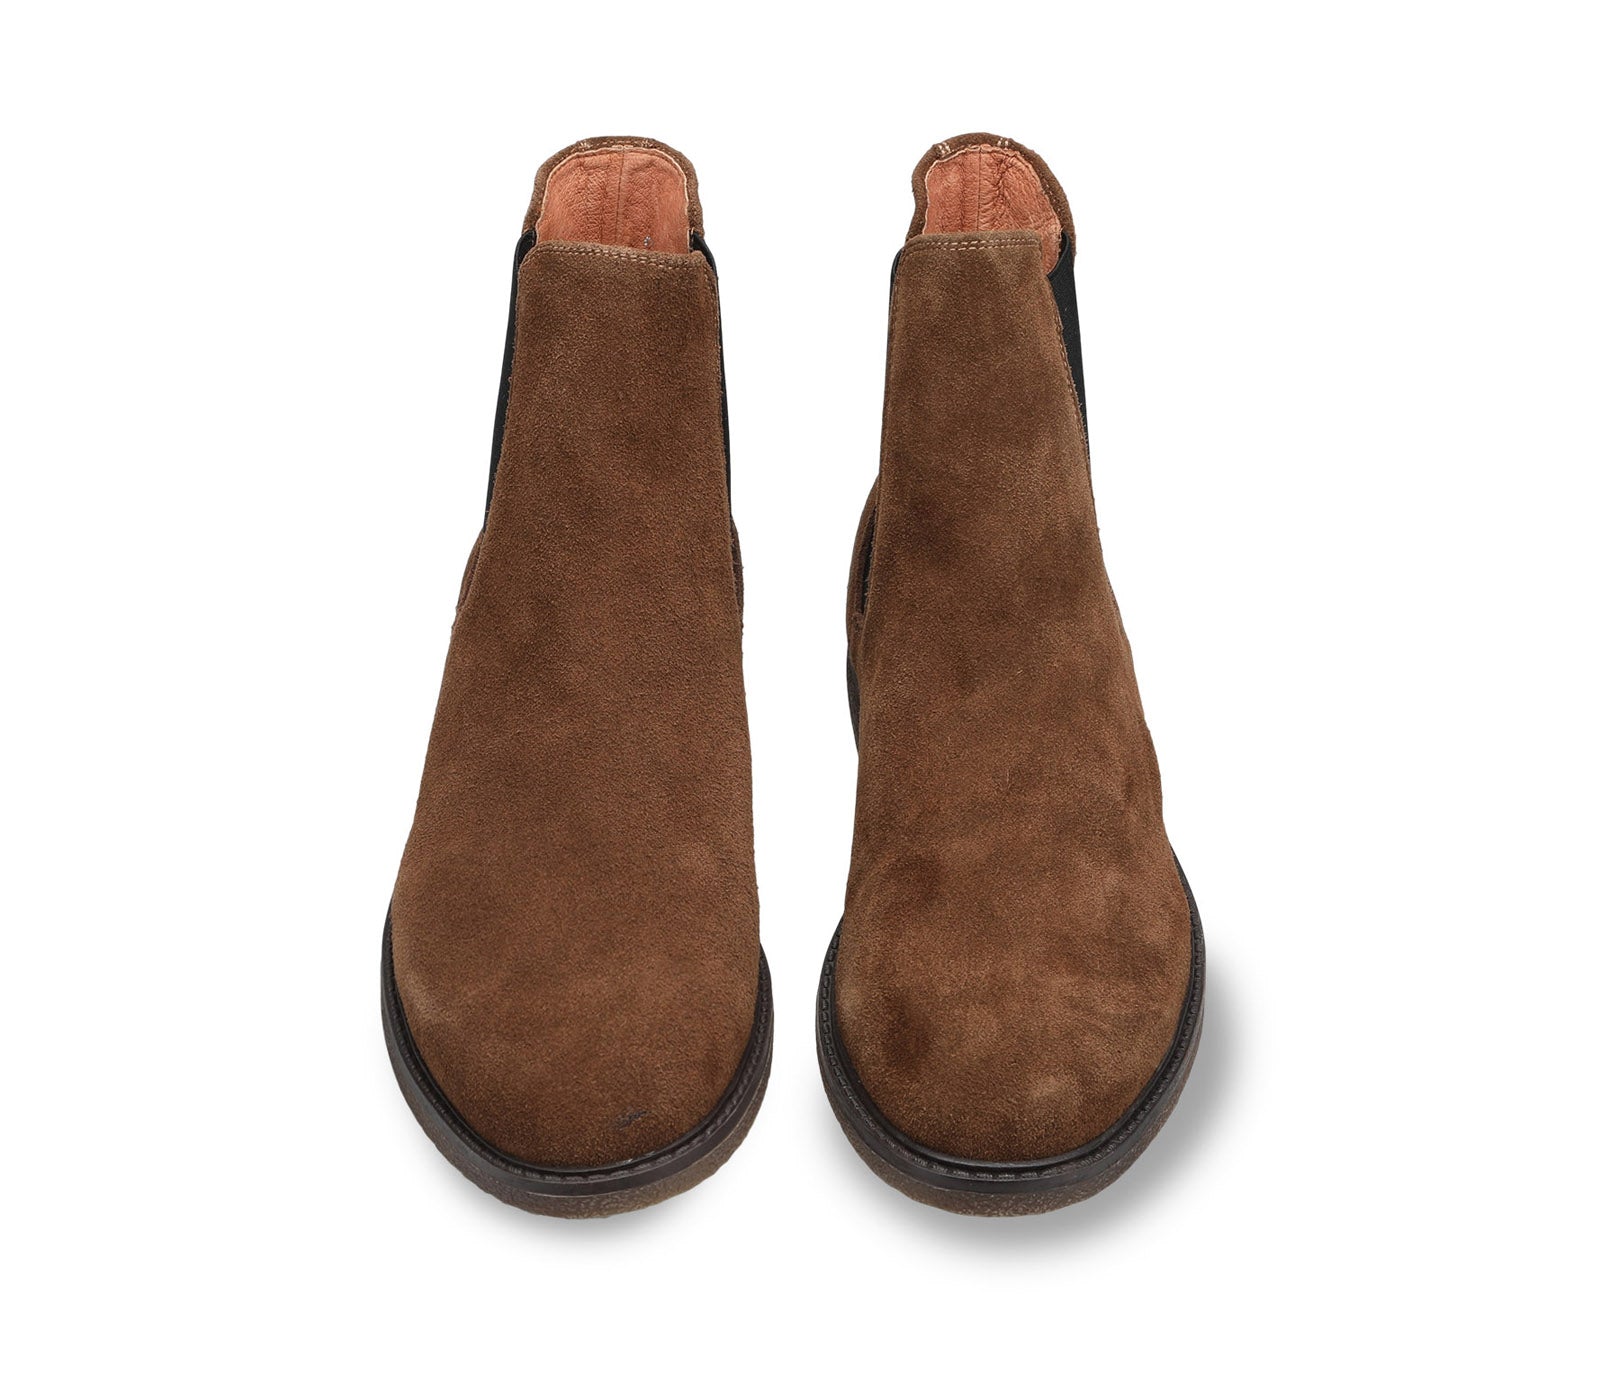 Men's Tobacco-colored Chelsea Ankle Boots in Suede Leather with Elasticized Inserts